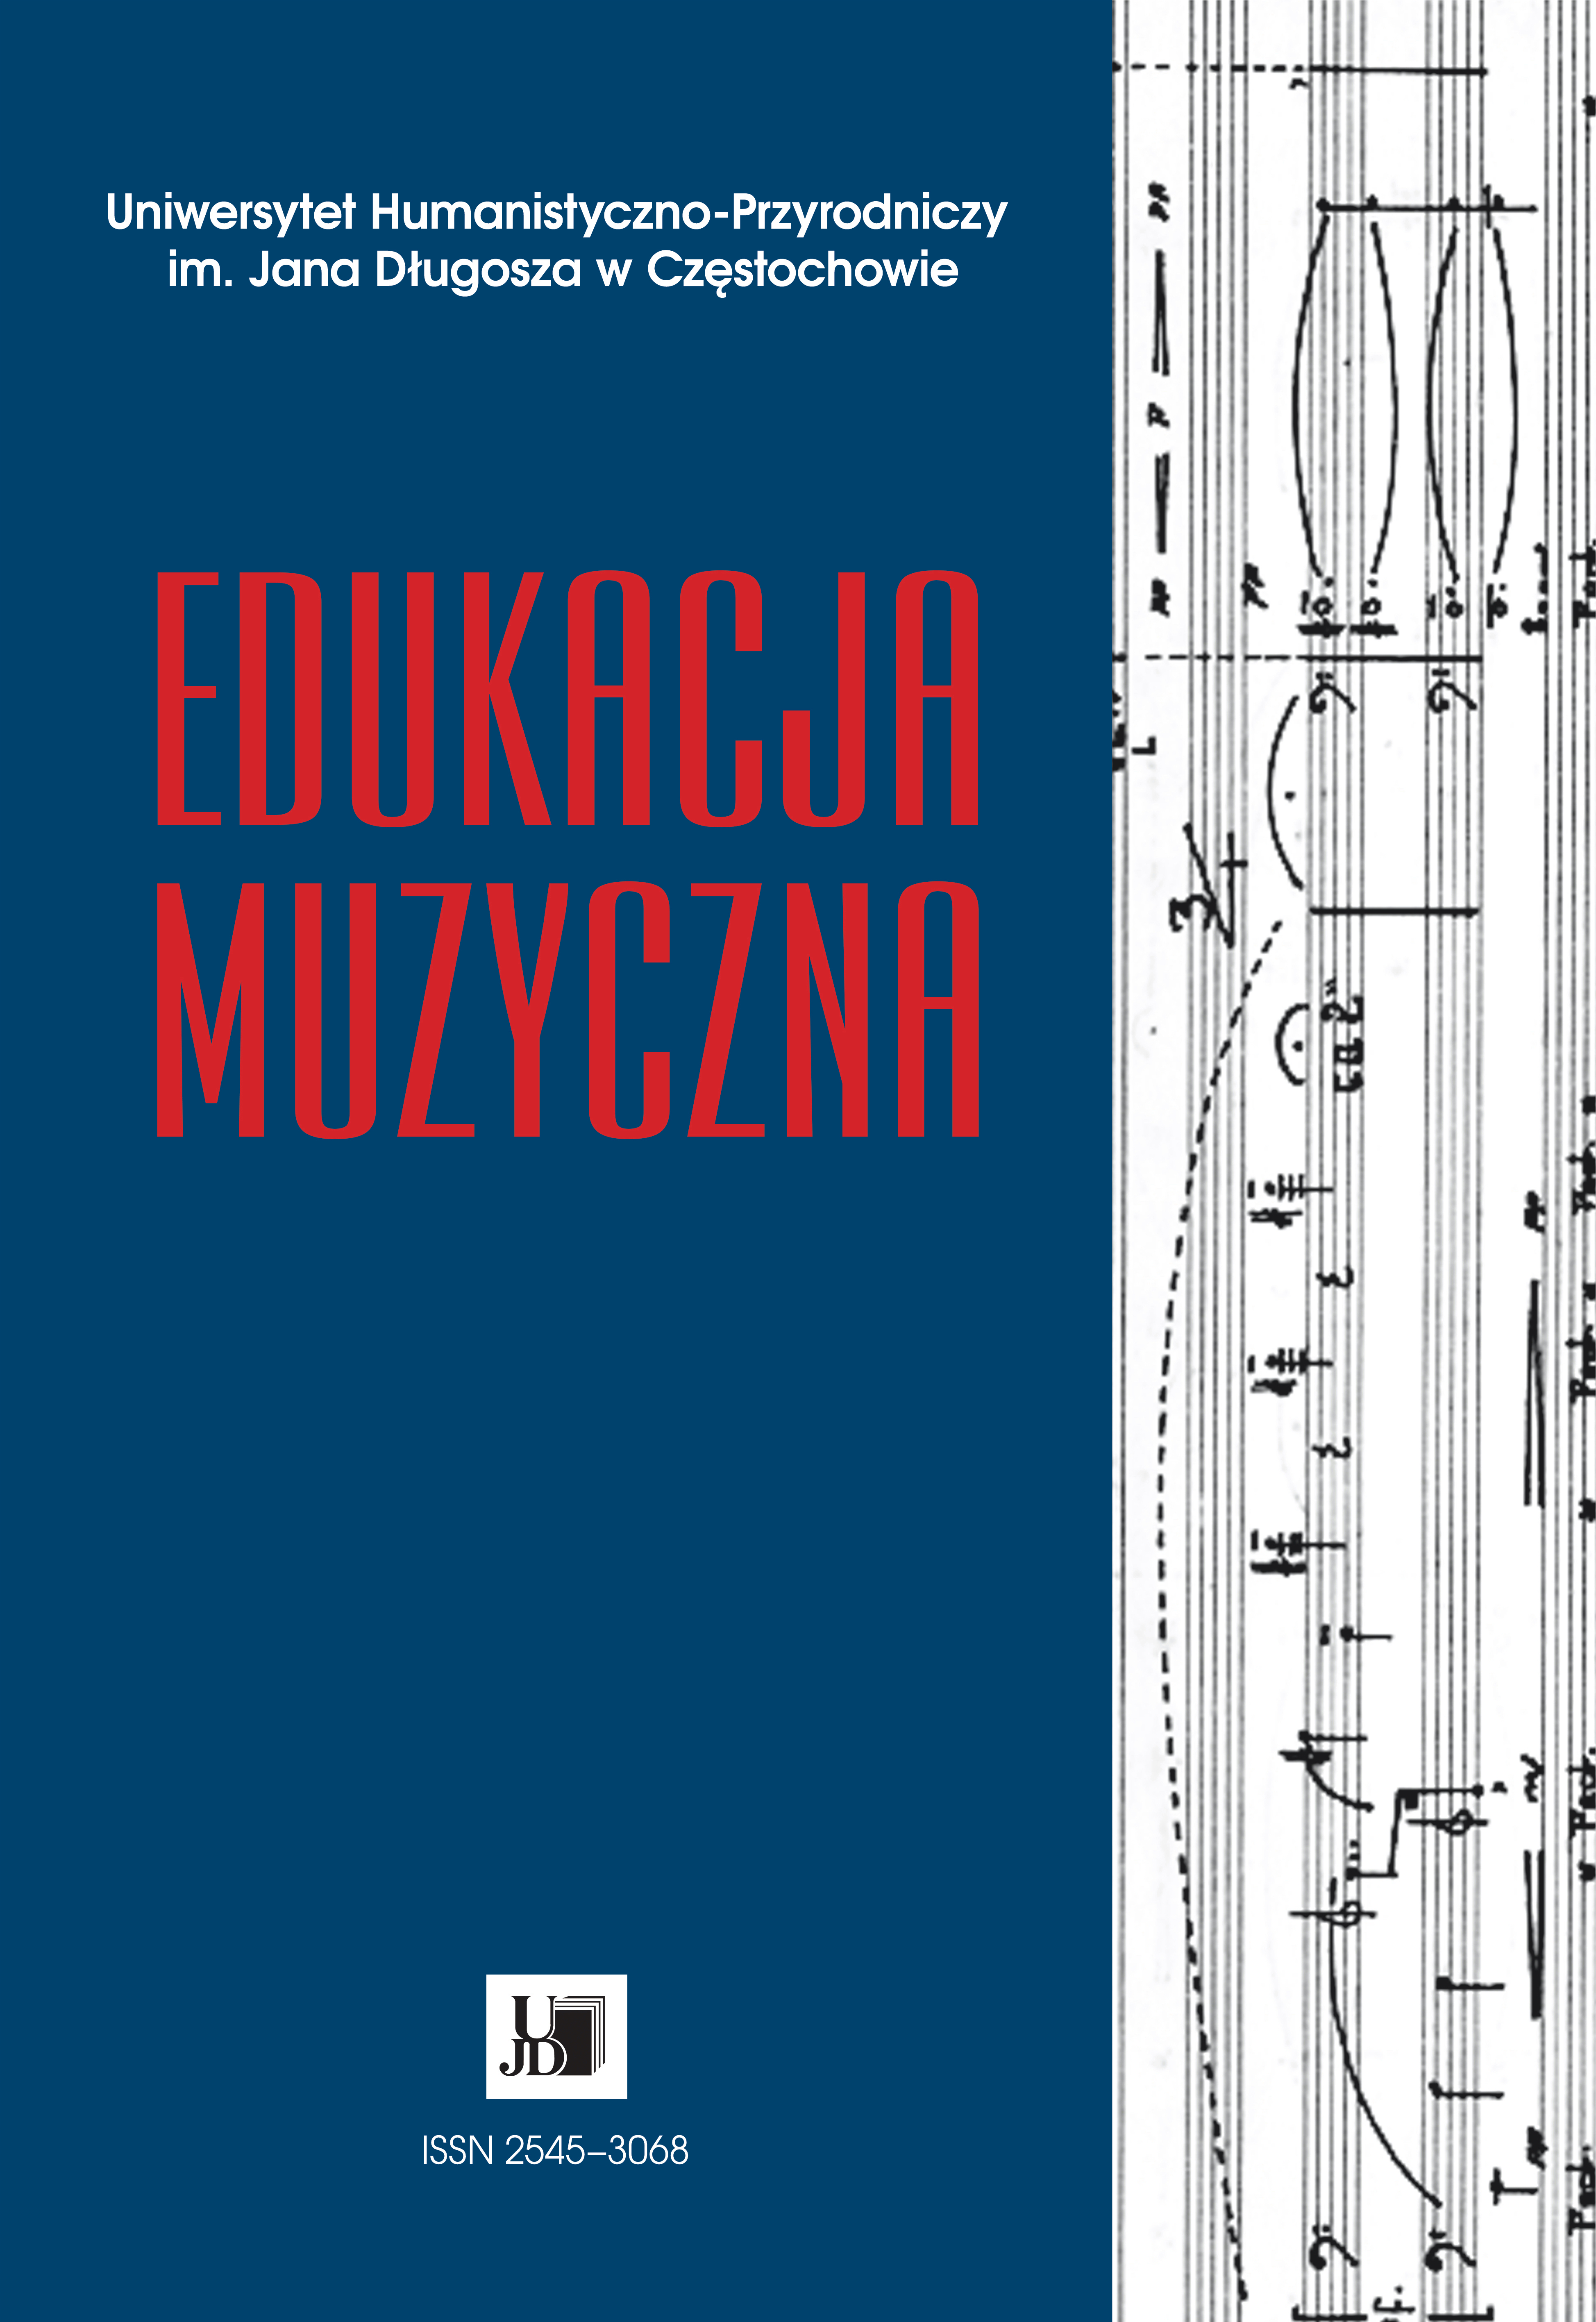 An analysis of the phonic material in selected radio dramas by Andrzej Waligórski Cover Image